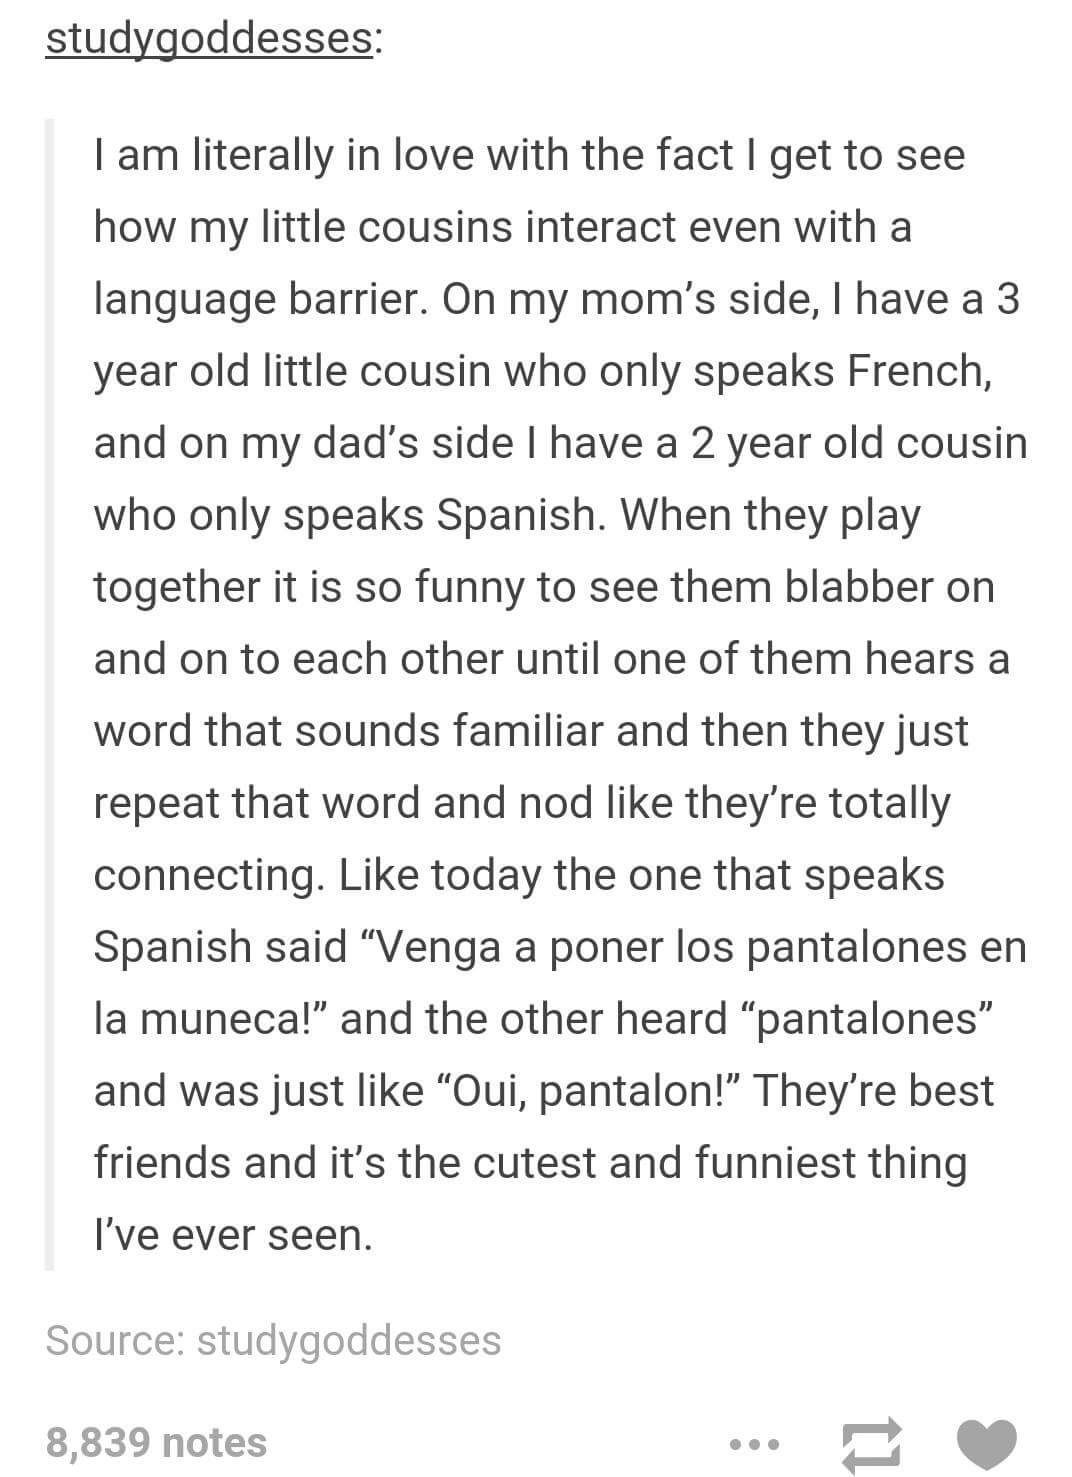 language barrier meme - studygoddesses I am literally in love with the fact I get to see how my little cousins interact even with a language barrier. On my mom's side, I have a 3 year old little cousin who only speaks French, and on my dad's side I have a